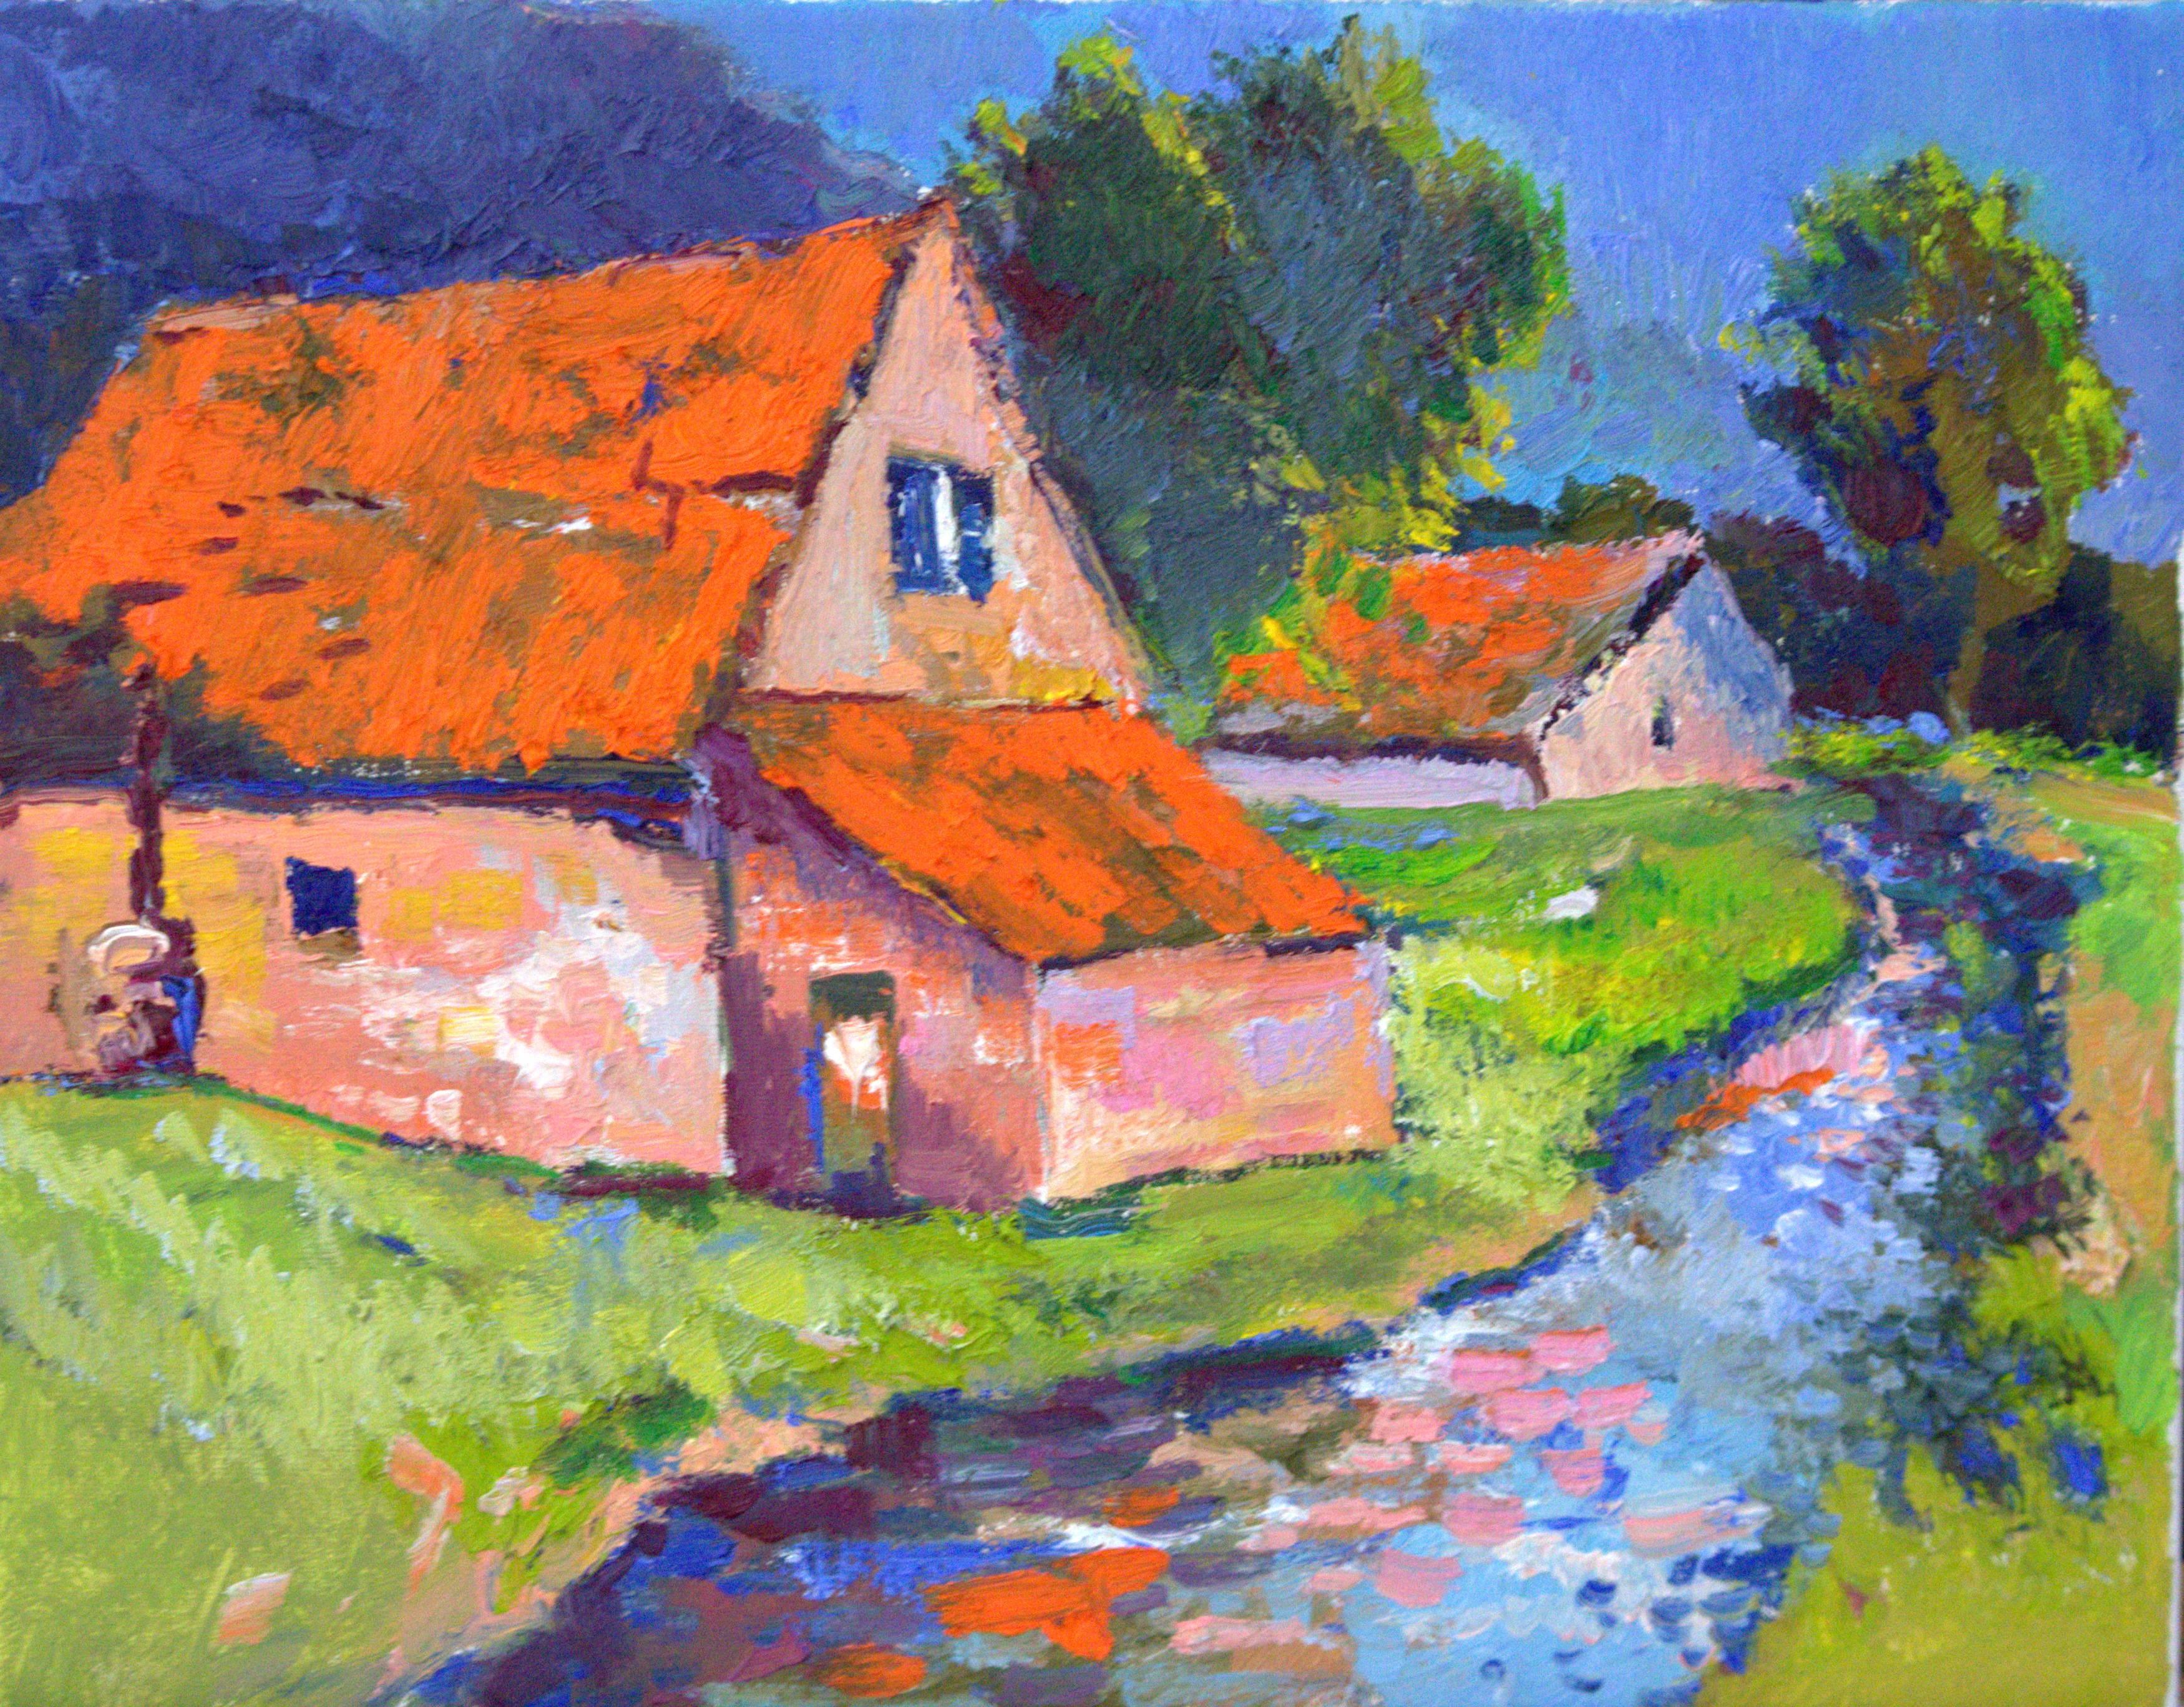 Farm Houses with Orange Roofs - Art by Suren Nersisyan